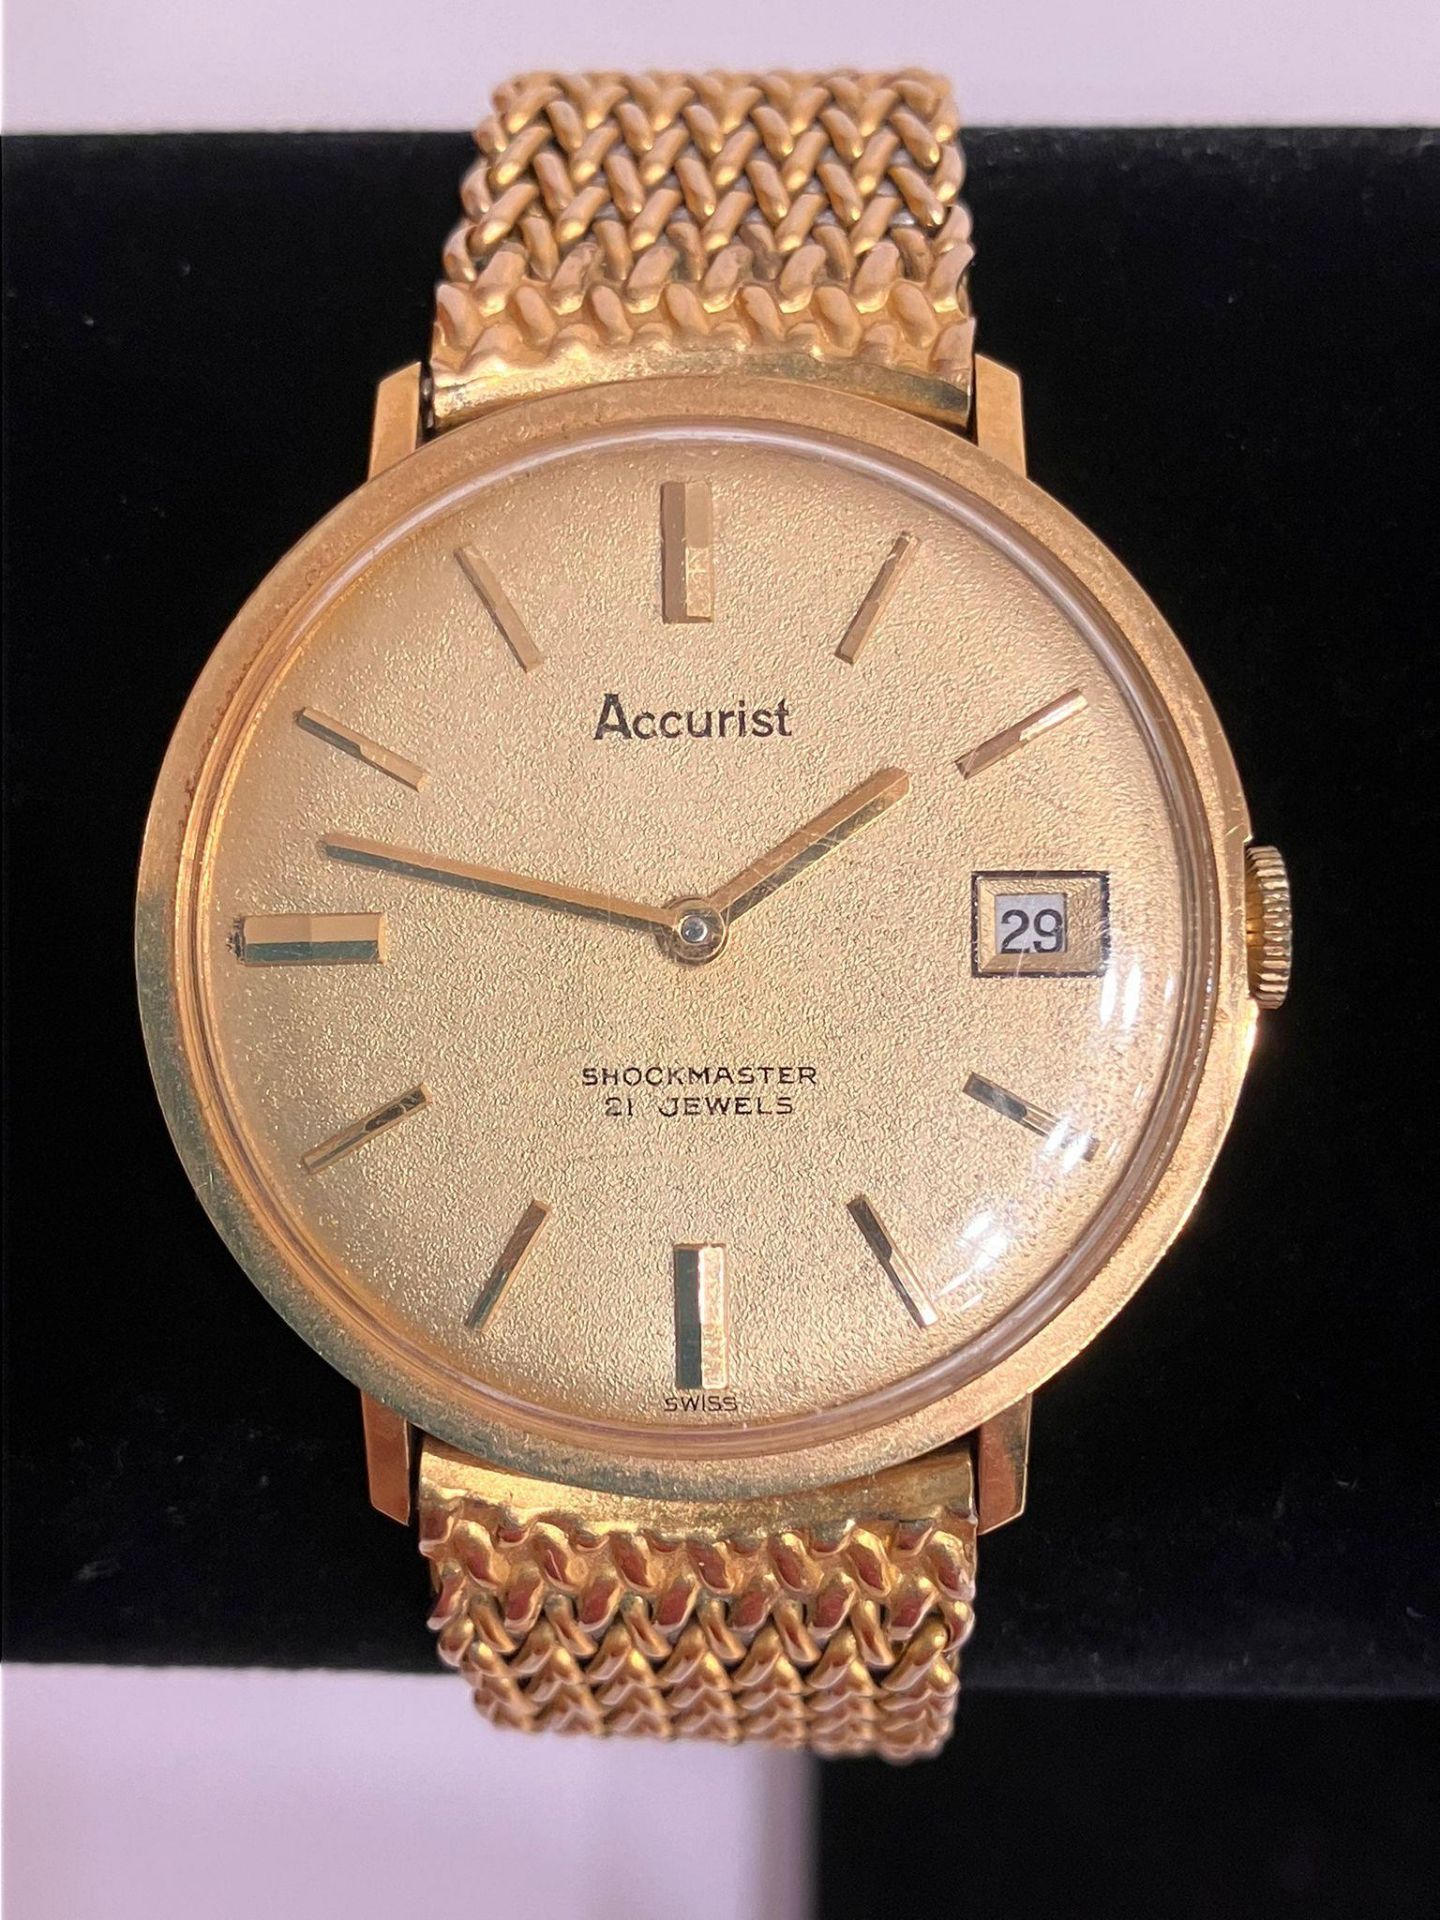 Gentleman’s vintage ACCURST SHOCKMASTER WRISTWATCH. Gold plated finish with gold plated mesh